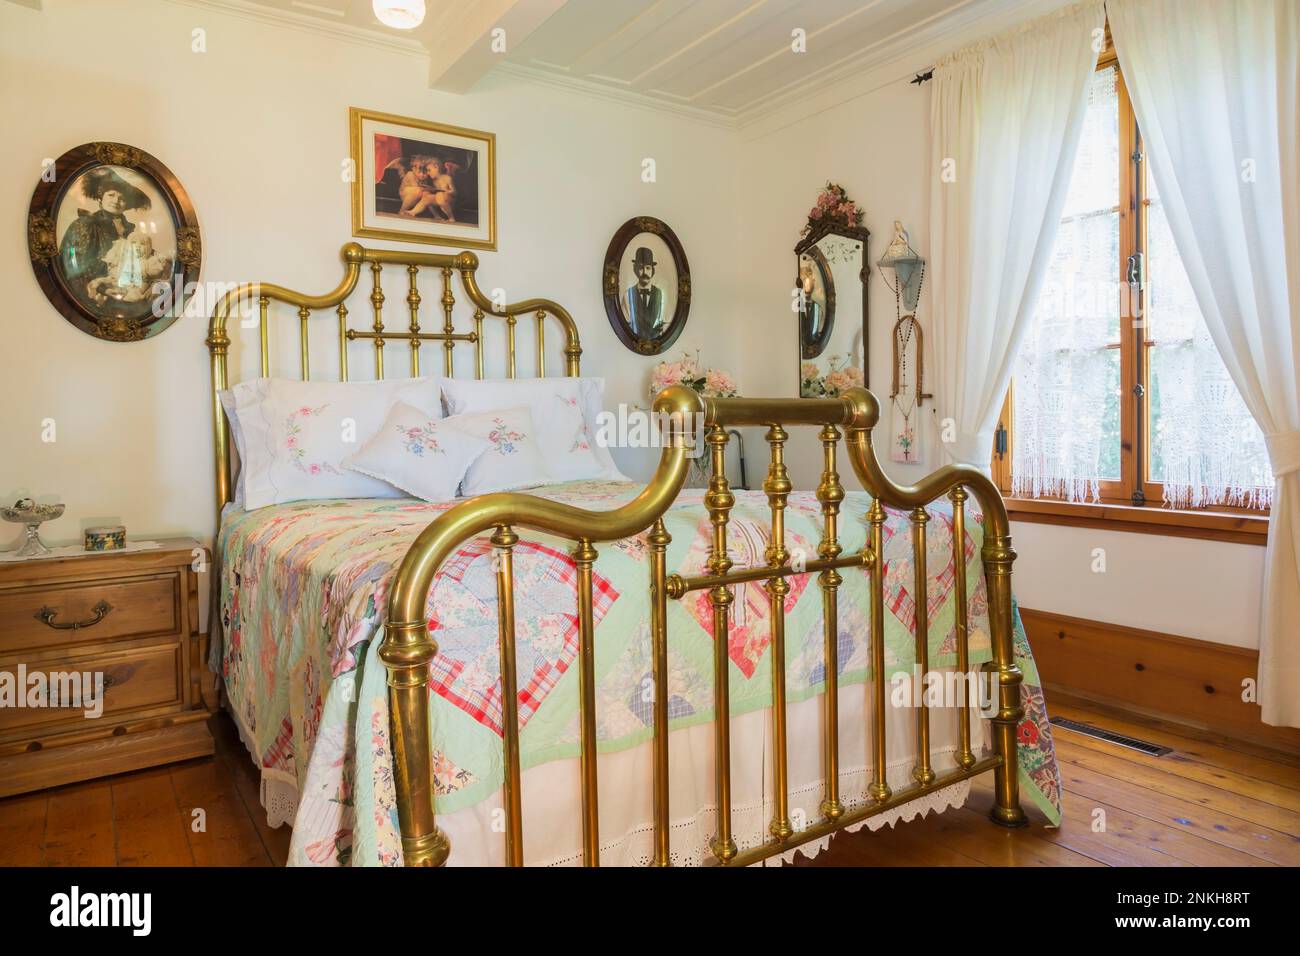 Double bed with antique brass headboard and footboard plus pine